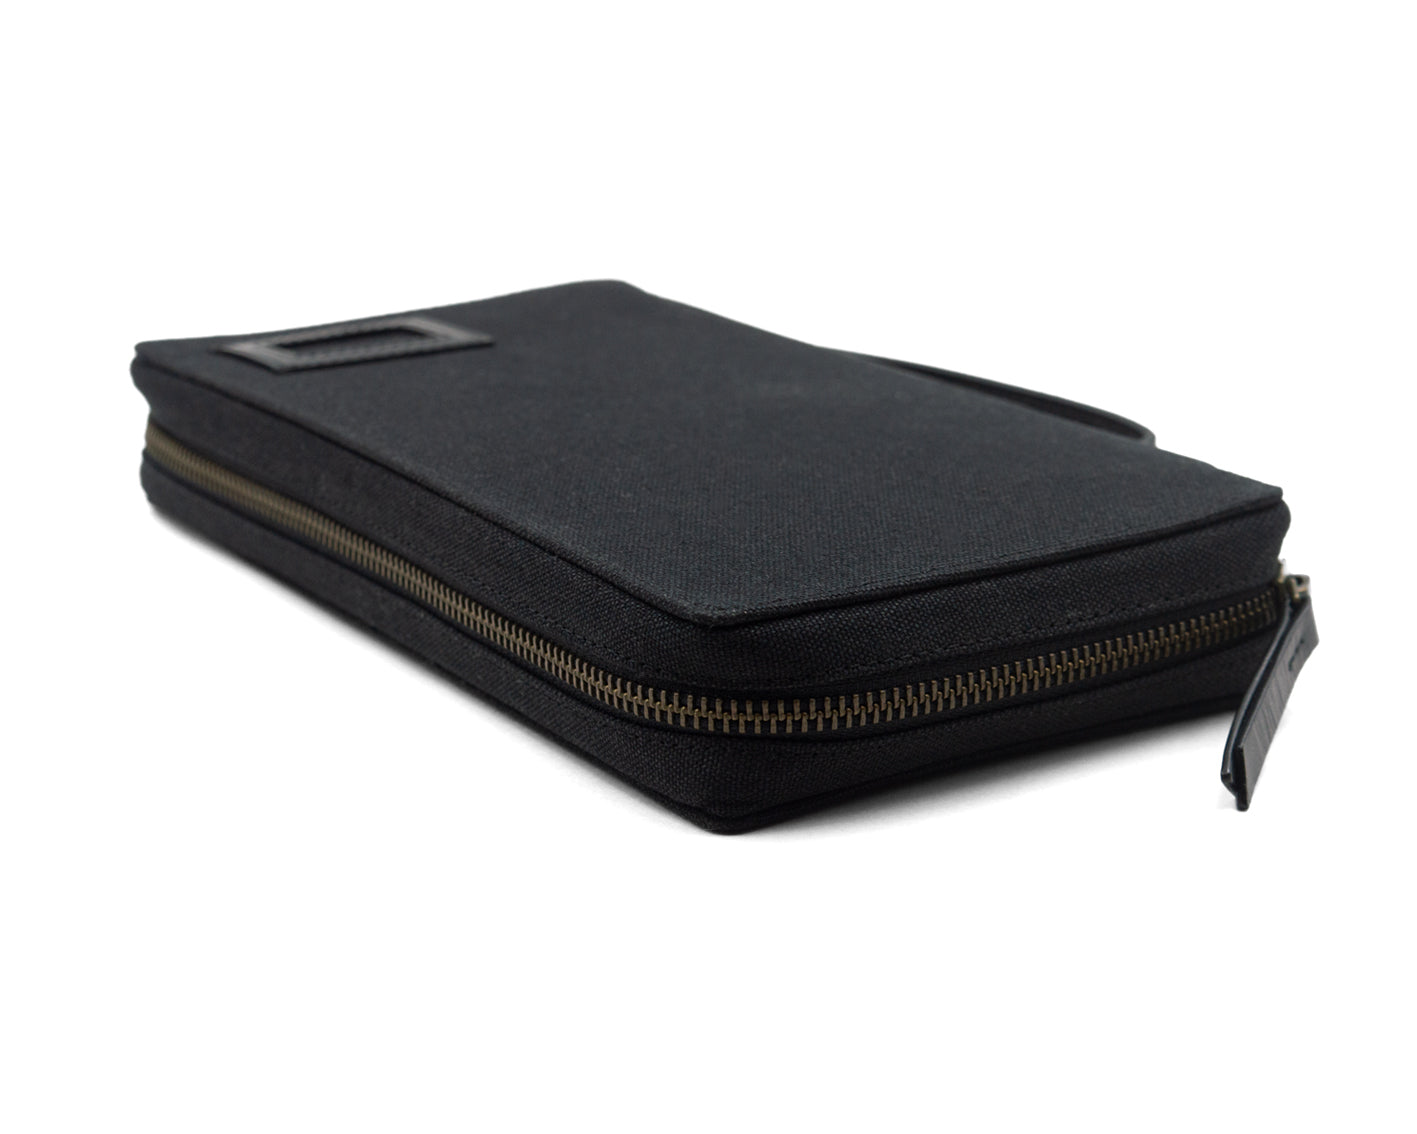 Bank Organiser - Black - The Leather Chef